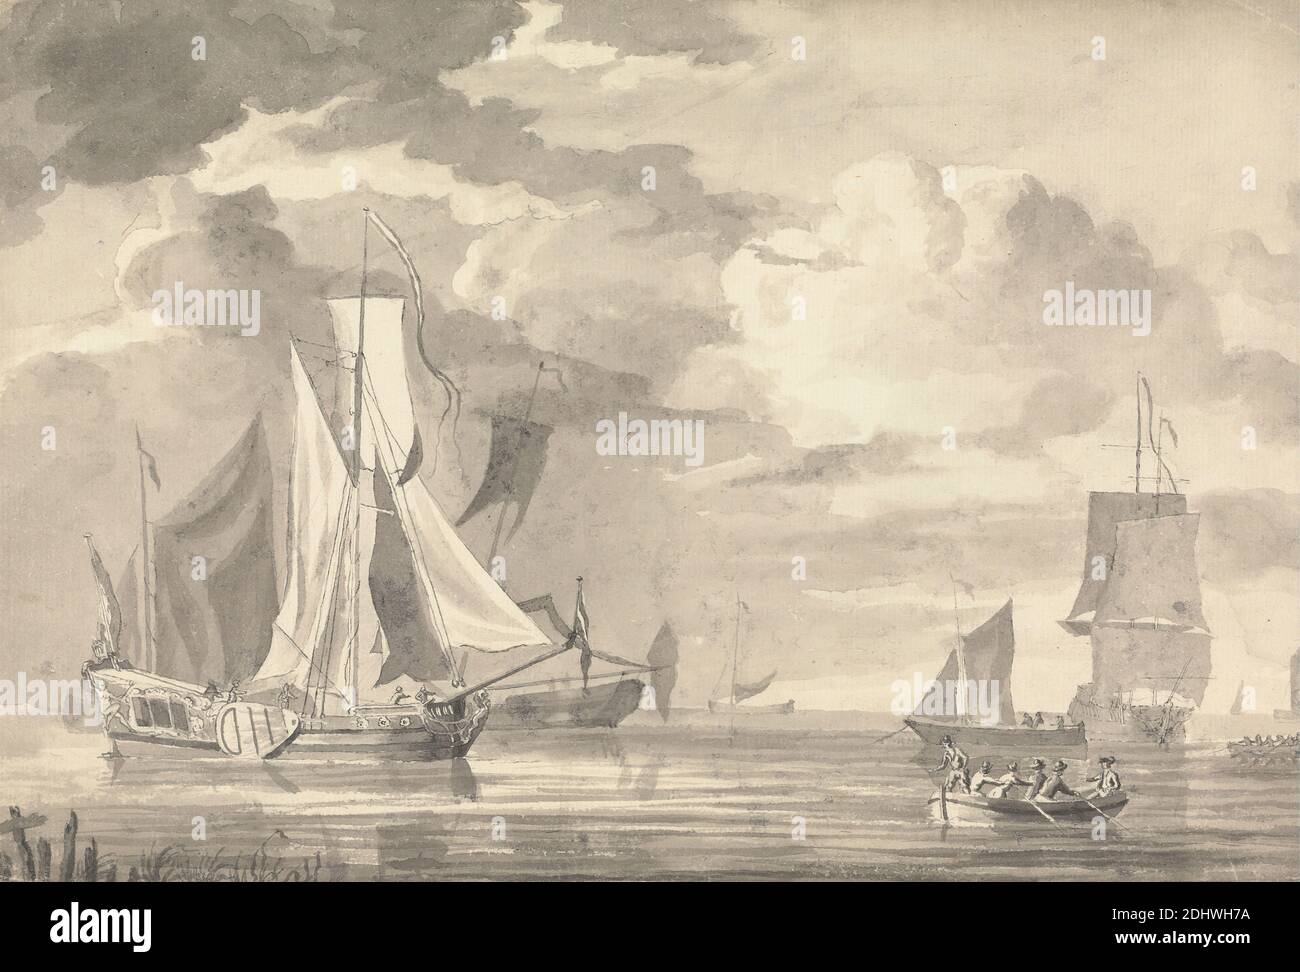 Various Shipping off the Coast, John Greenwood, 1727–1792, American, active in Britain (from 1763), undated, Graphite, pen and ink, wash on medium, slightly textured, cream laid paper, Sheet: 8 3/8 x 12 3/8in. (21.3 x 31.4cm) and Sheet: 8 3/8 × 12 3/8 inches (21.3 × 31.4 cm), men, ocean, rowboat, sails, ships Stock Photo